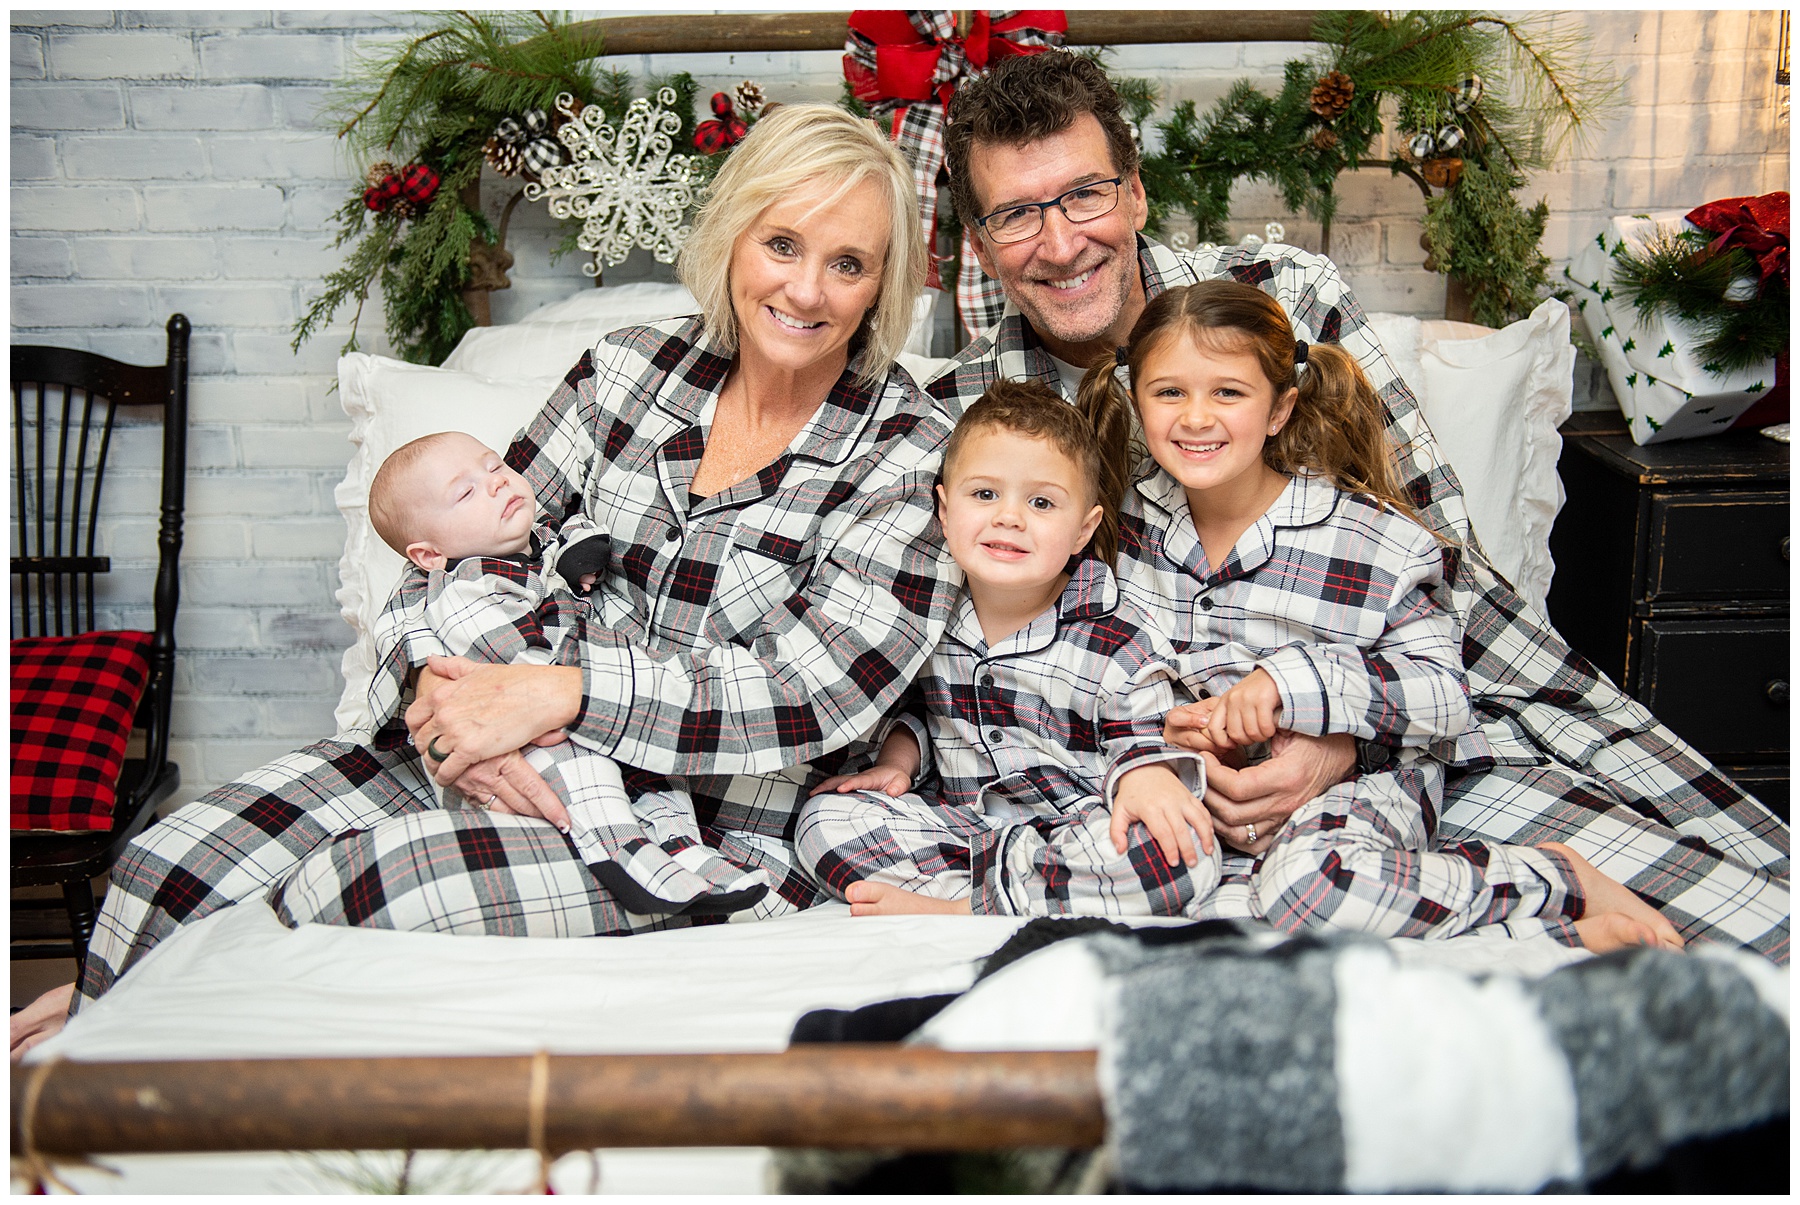 Chris Stephens and wife cuddling with grandchildren during holiday family photo session